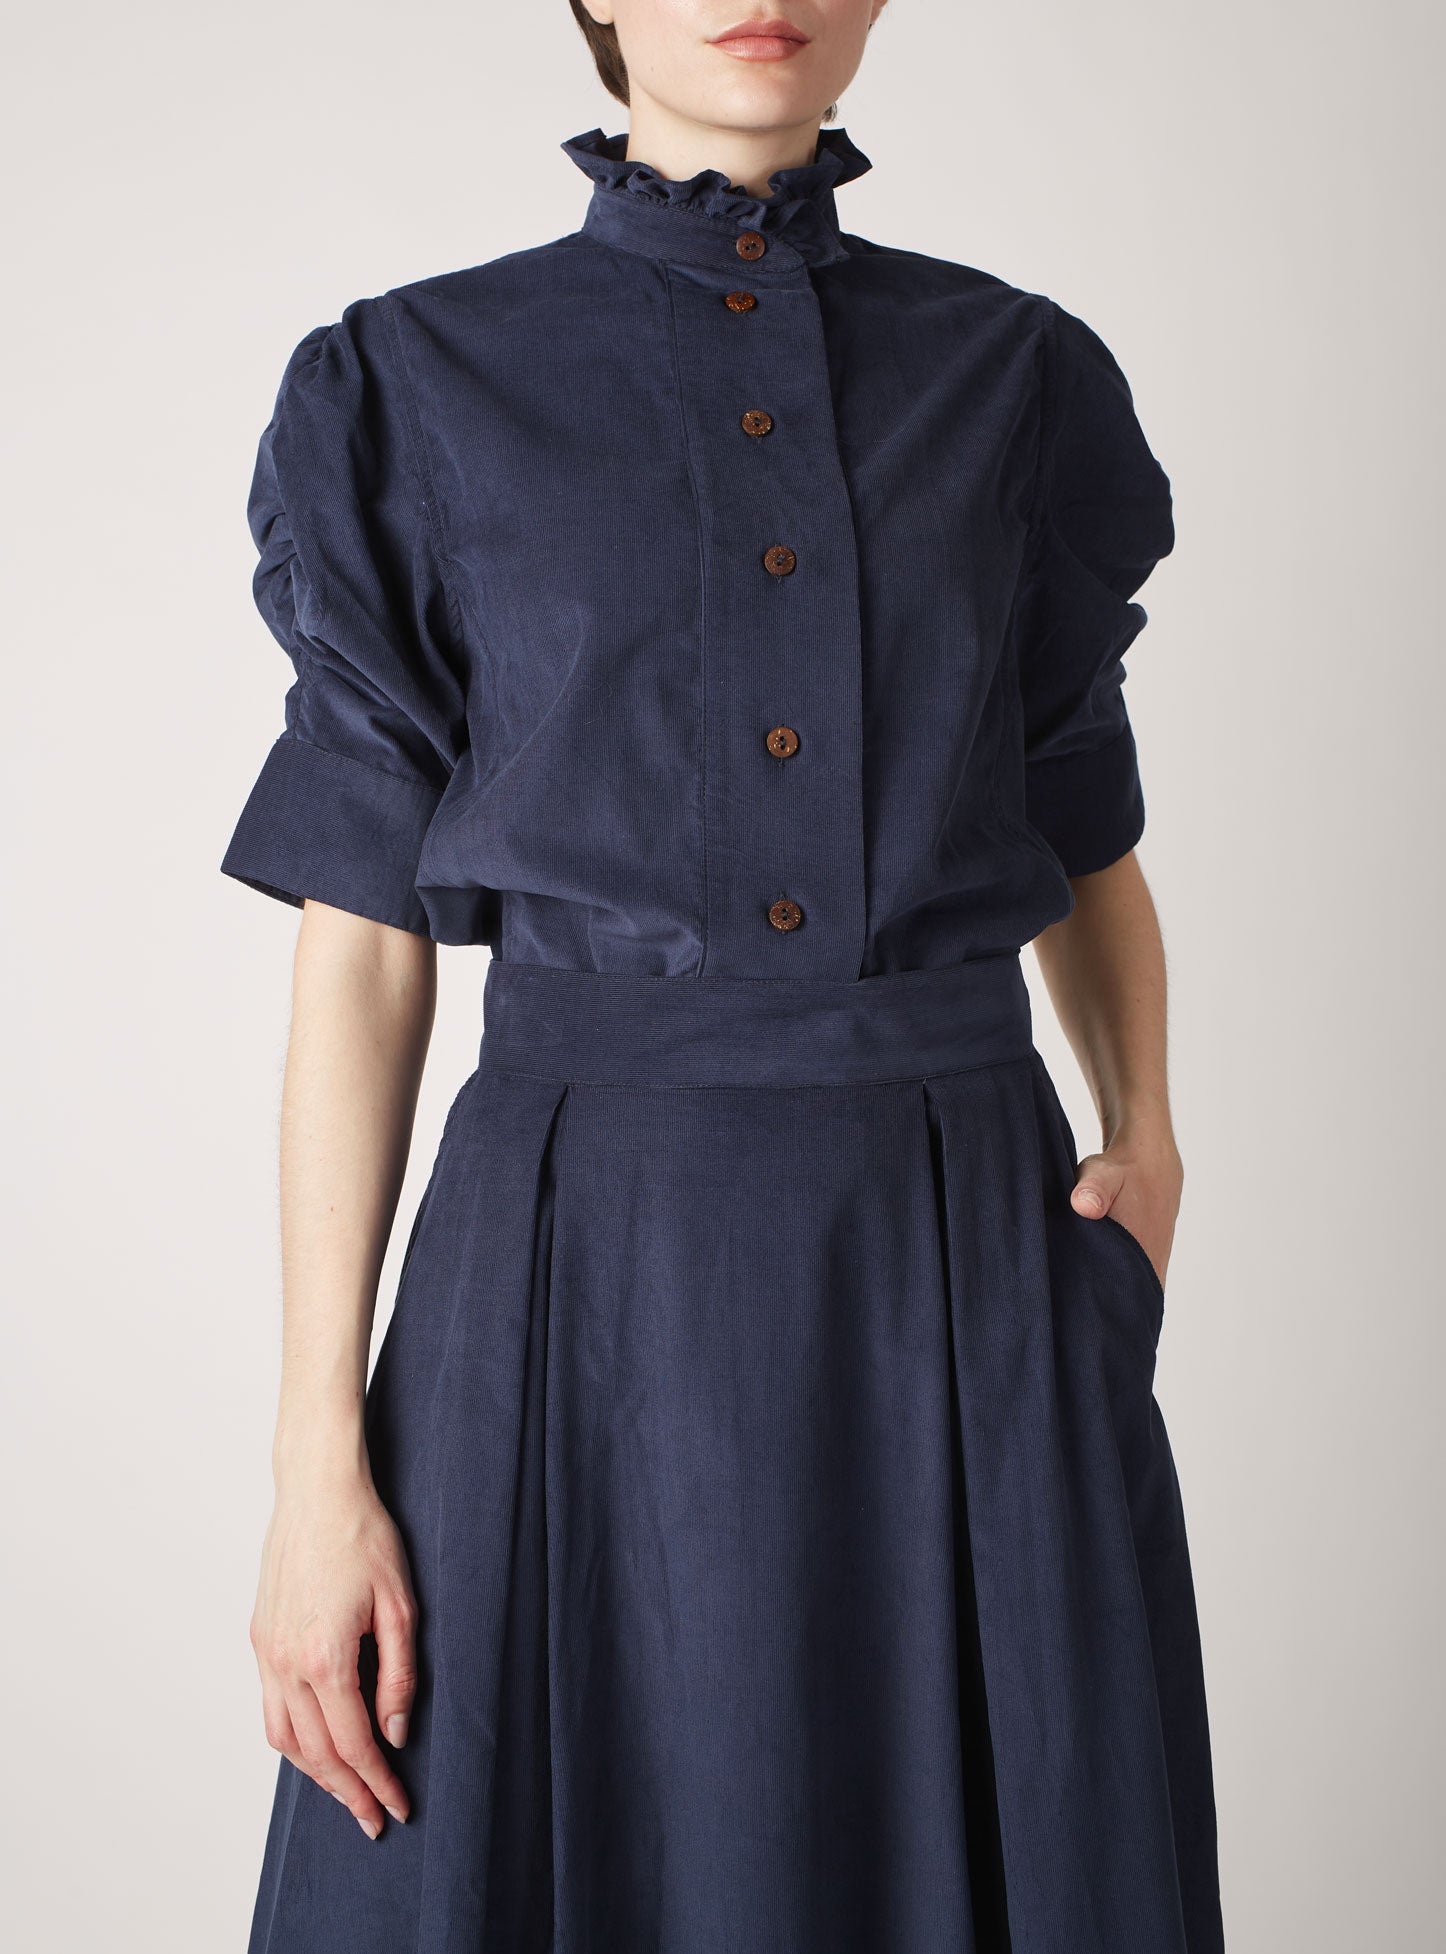 Front view of Vita Prussian Blue Corduroy Shirt  with Wynona Skirt by Thierry Colson